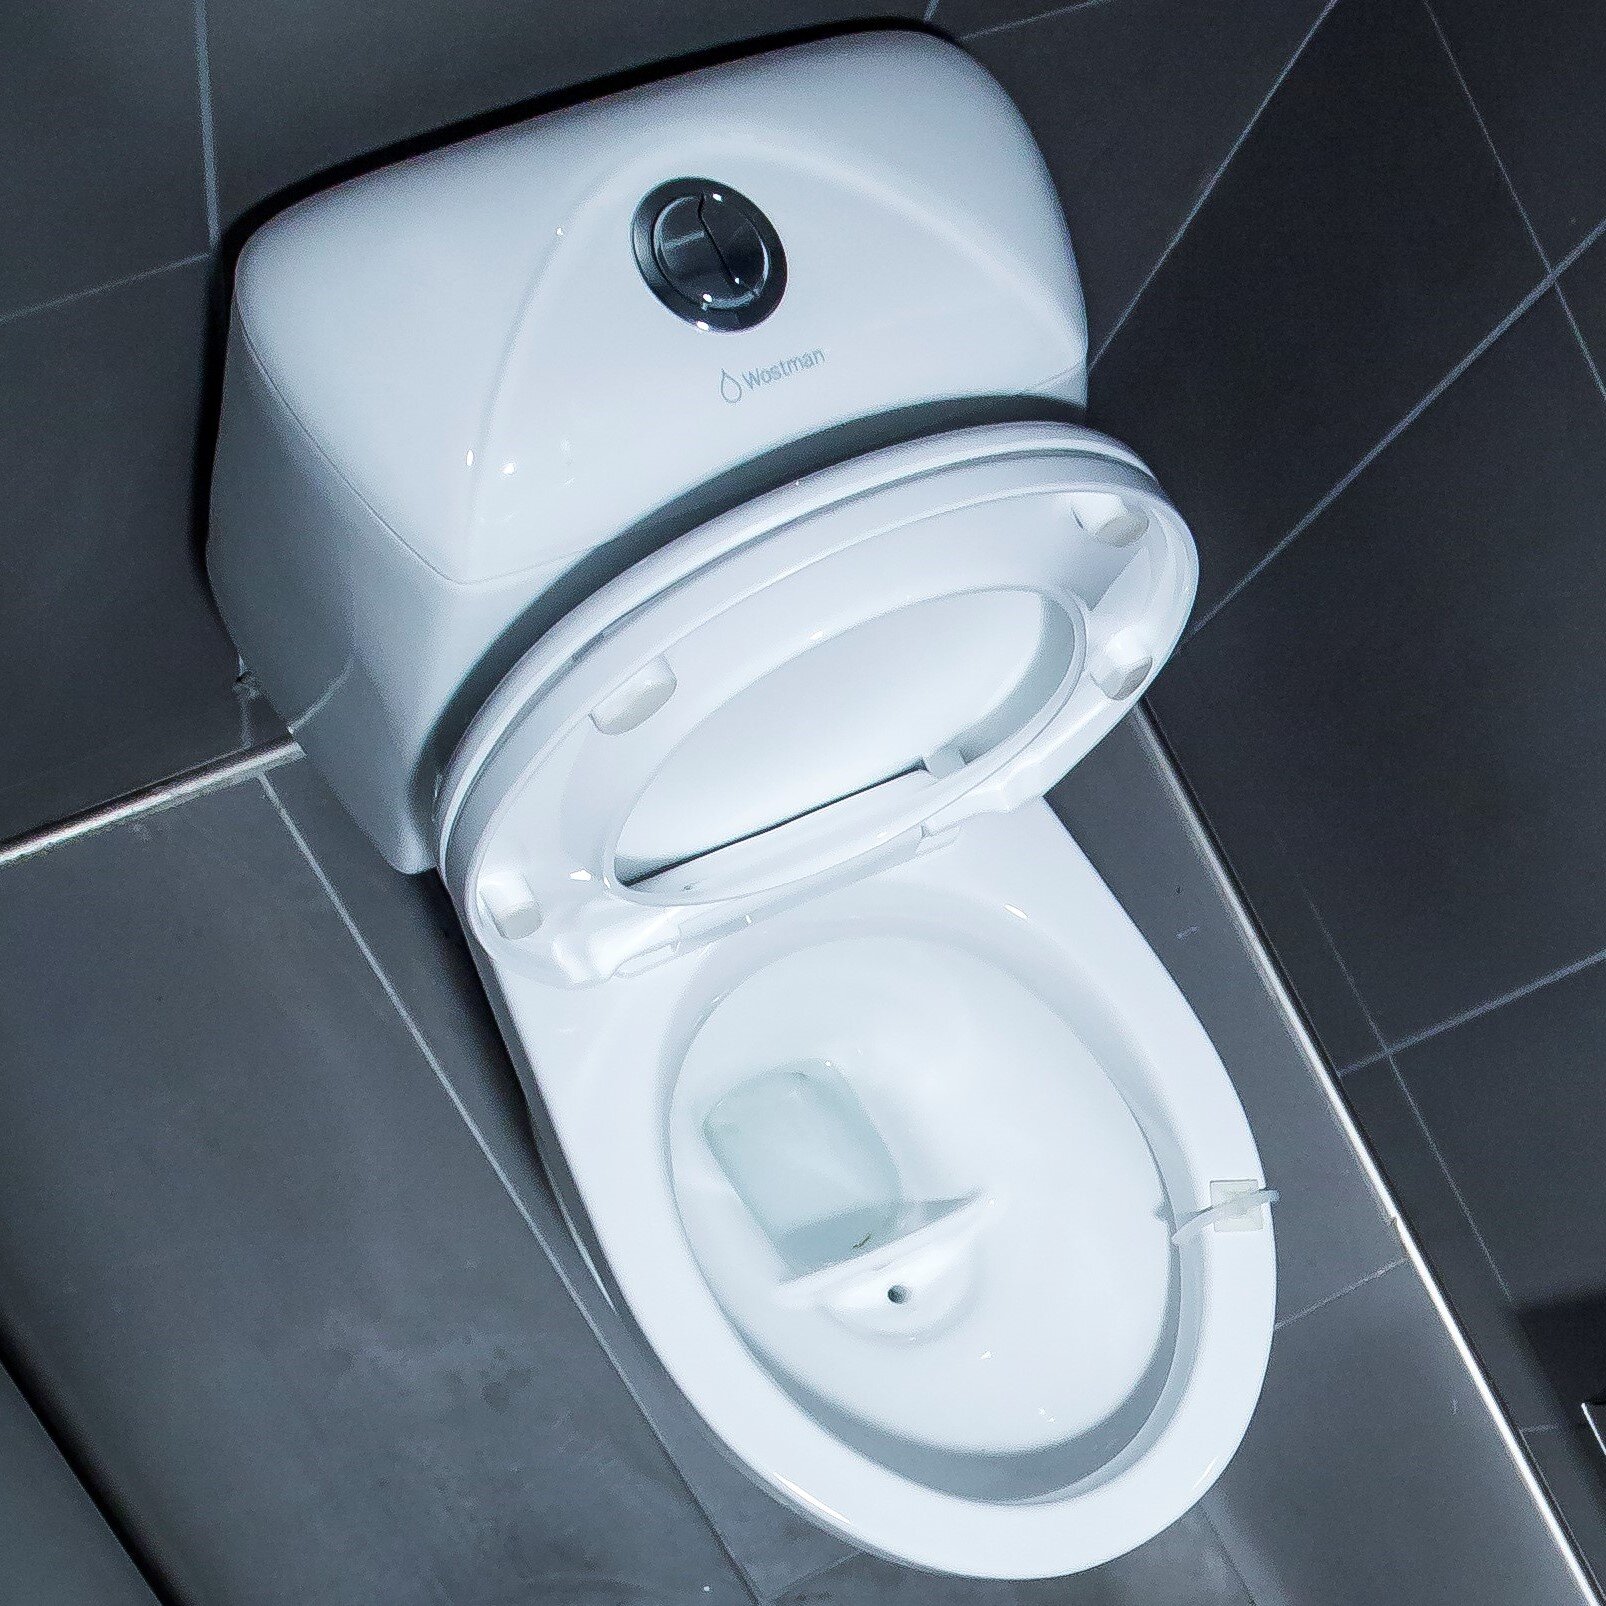 #Urine-diverting toilets expel fewer virus particles than traditional toilets, study suggests